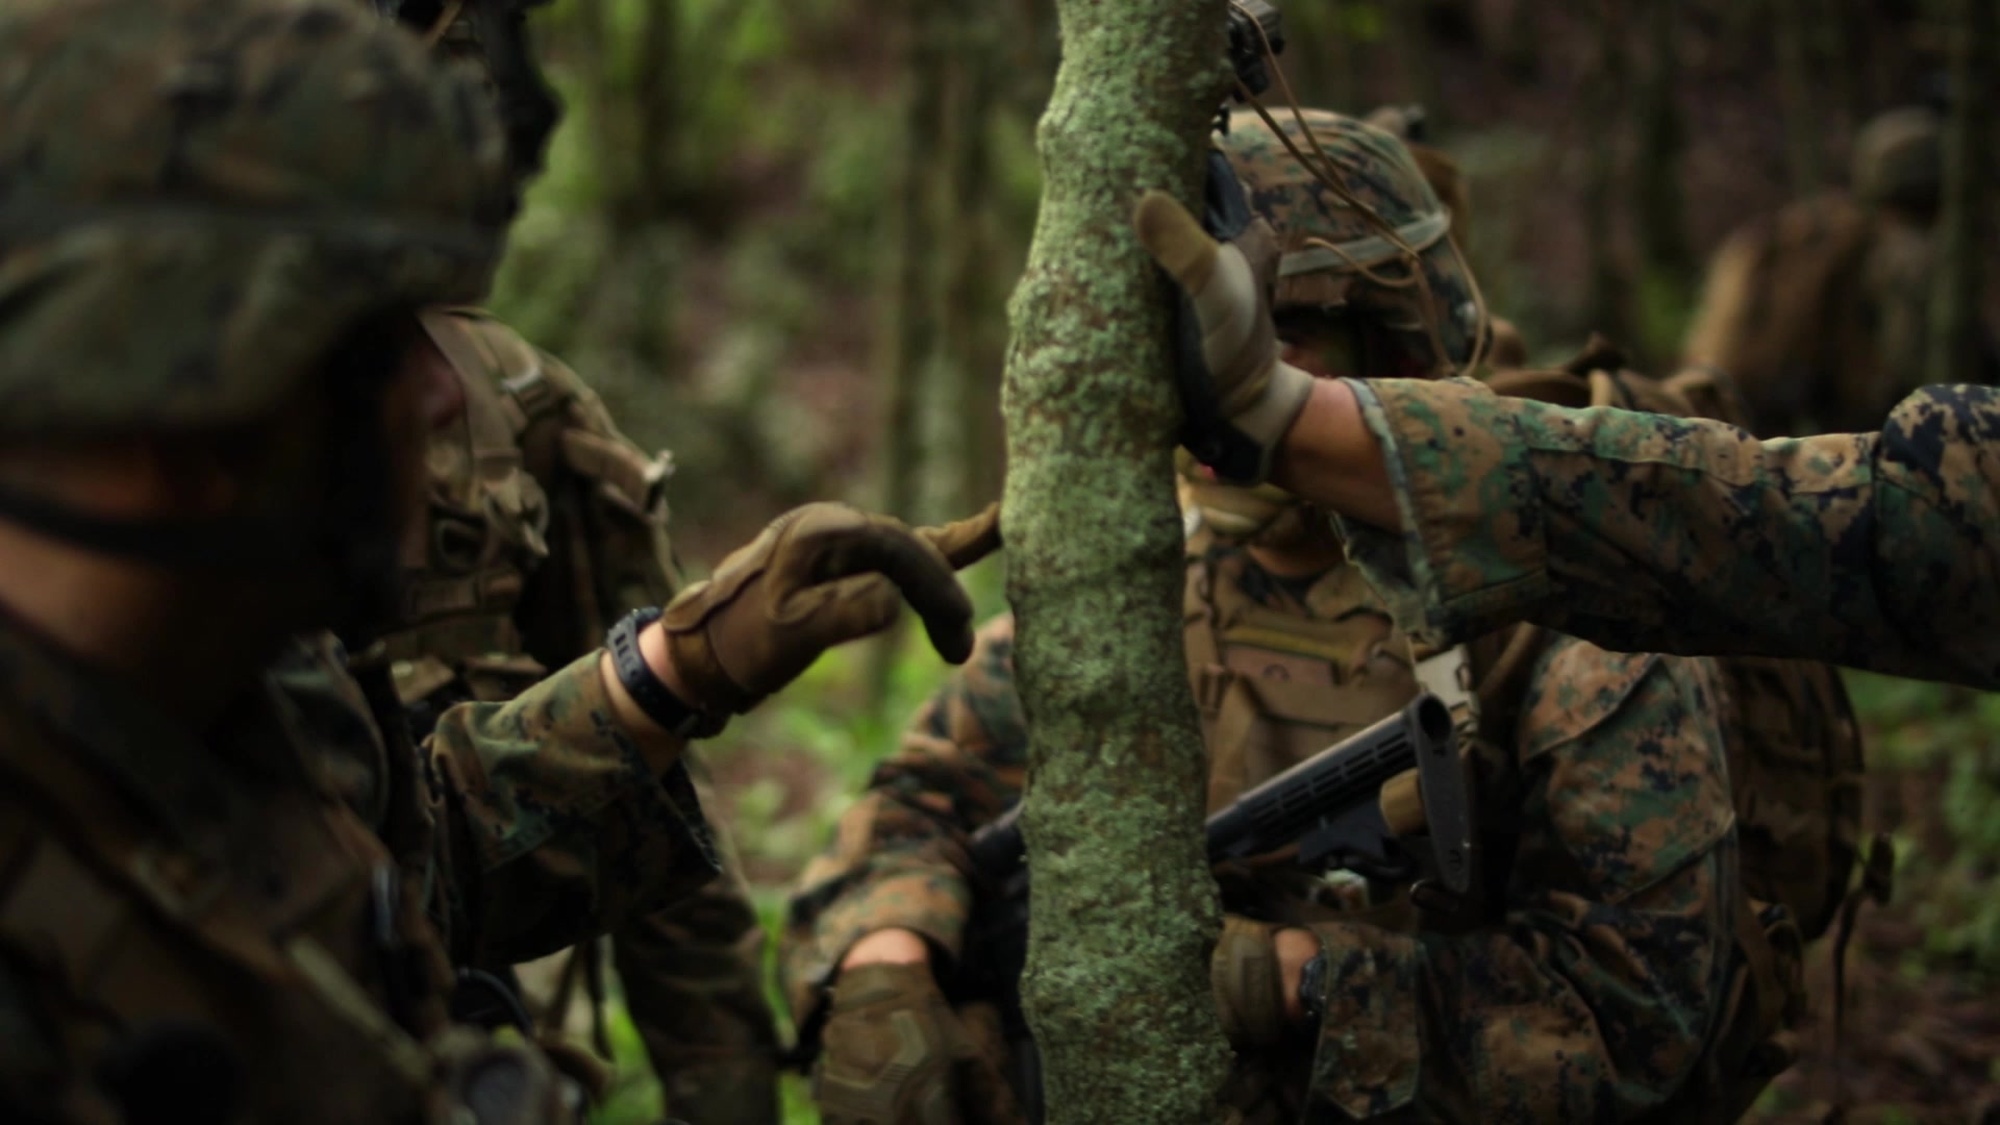 Students with Advanced Infantry Marine Course (AIMC) take part in a field evaluation exercise at Marine Corps Training Area Bellows, Feb. 7, 2019. AIMC is intermediate training designed to enhance and test the Marine's skills and leadership abilities as squad leaders in a rifle platoon. (U.S. Marine Corps video by Cpl. Brendan Custer)